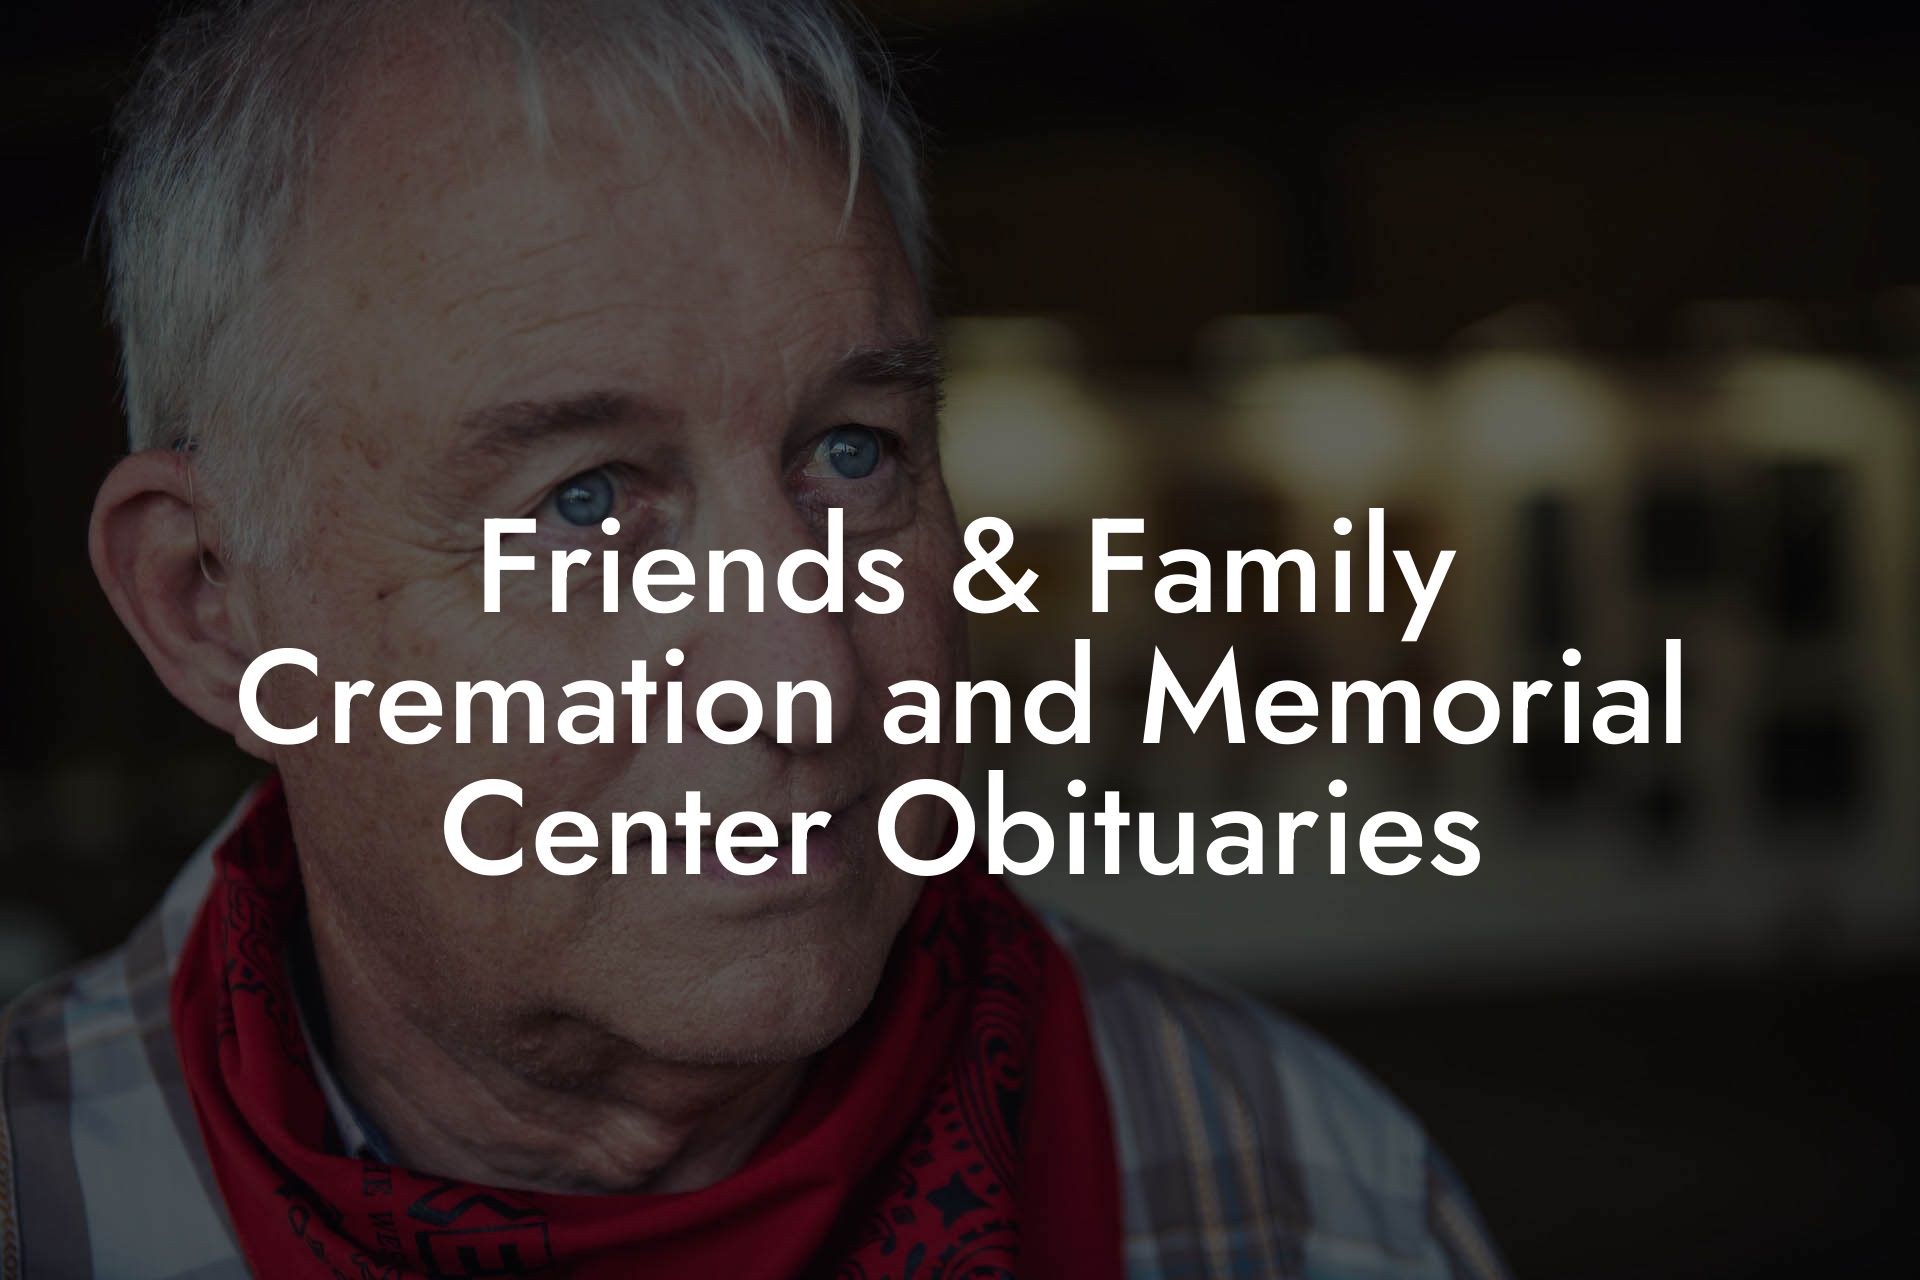 Friends & Family Cremation and Memorial Center Obituaries